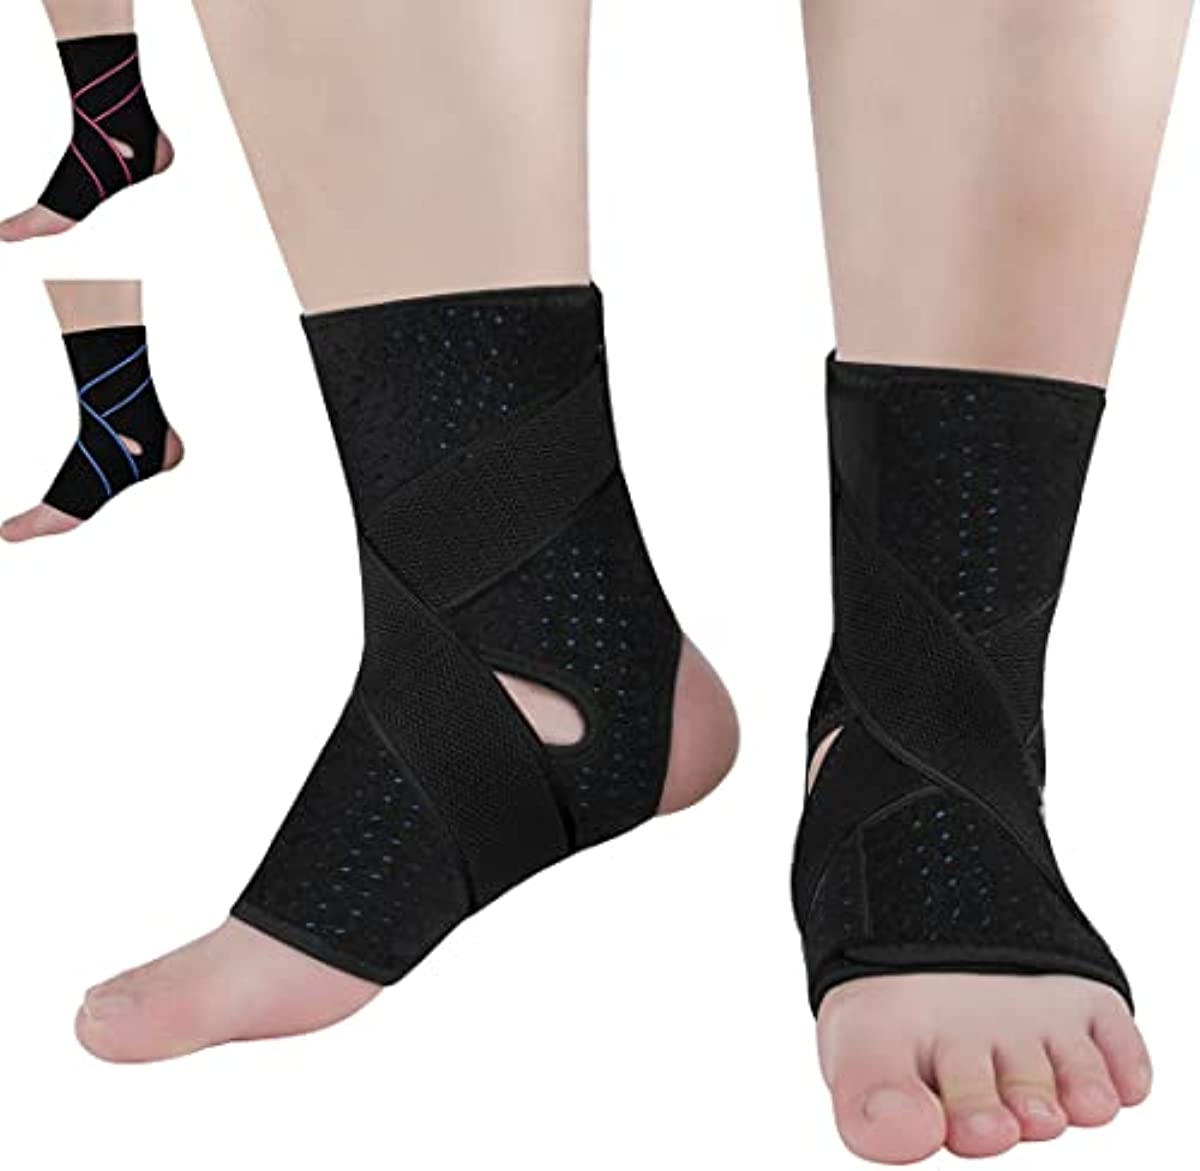 Vinaco Ankle Braces, 1 Pair Adjustable Compression Ankle Brace for Sprained Ankle, Strong Support & Breathable Ankle Support for Injury Recovery, Joint Pain, Swelling,Ankle Braces for Man & Women